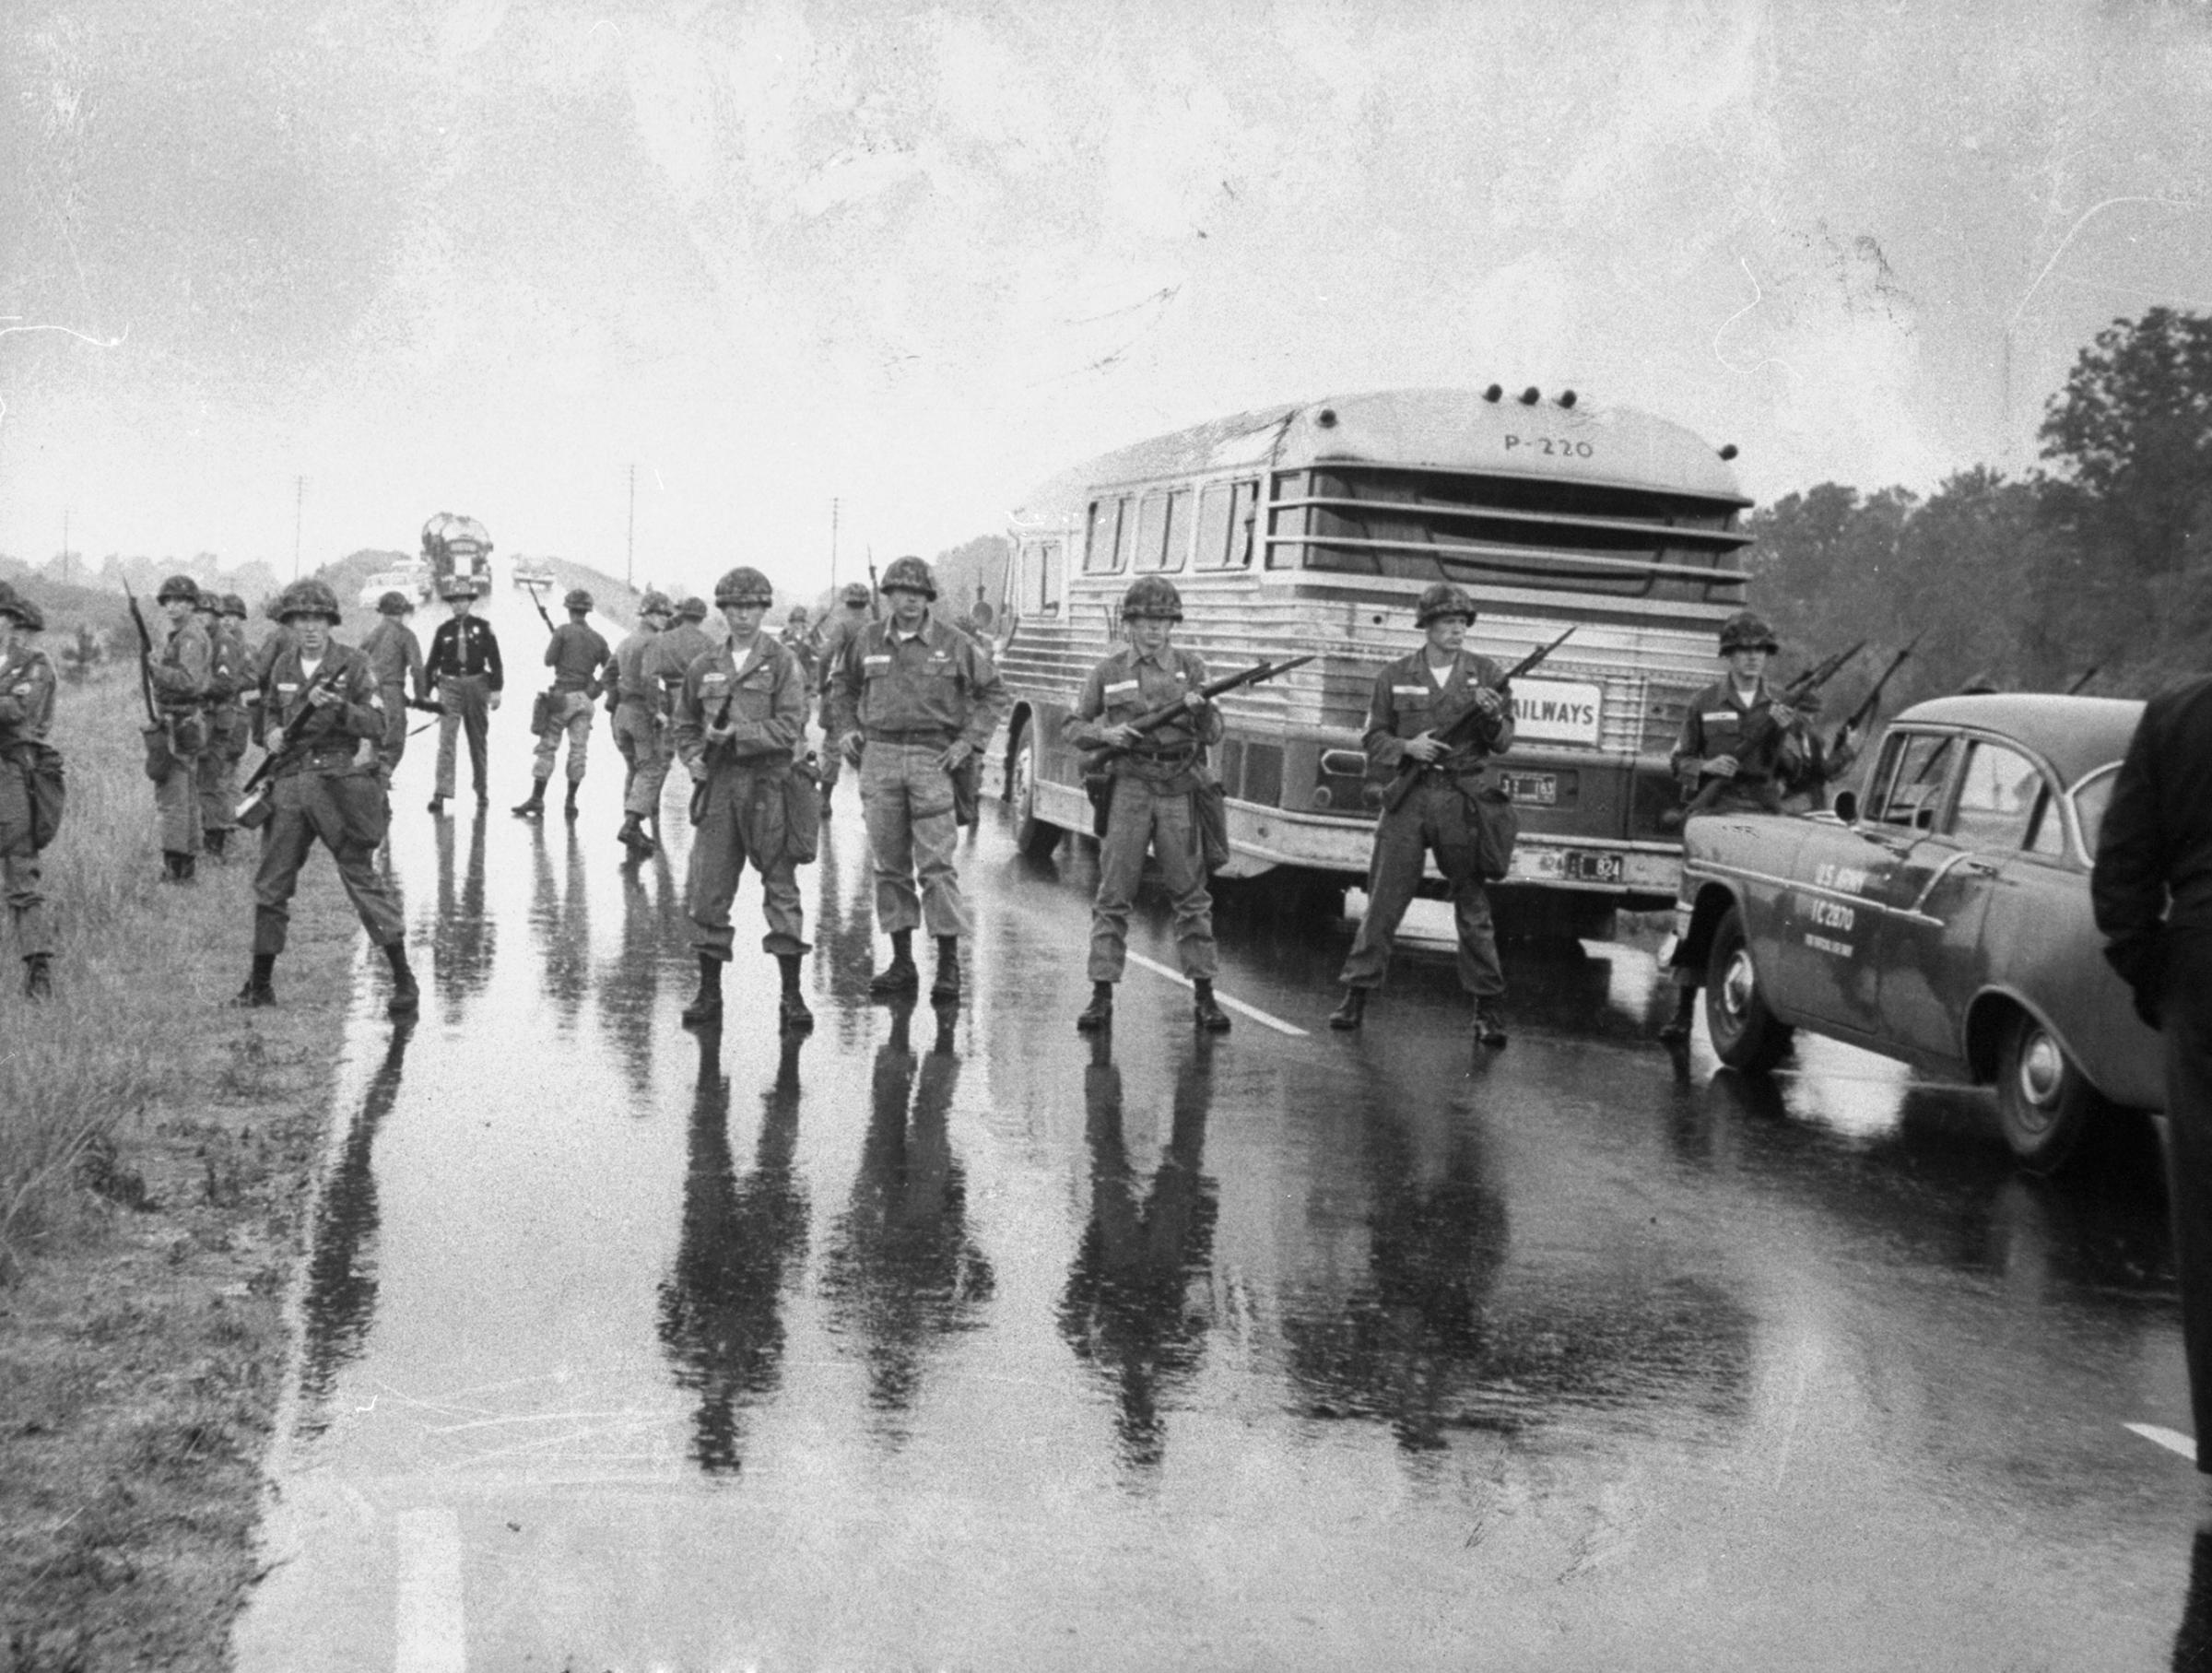 Just shy of the Mississippi-Alabama border, members of the Alabama National Guard surround a bus carrying freedom riders.